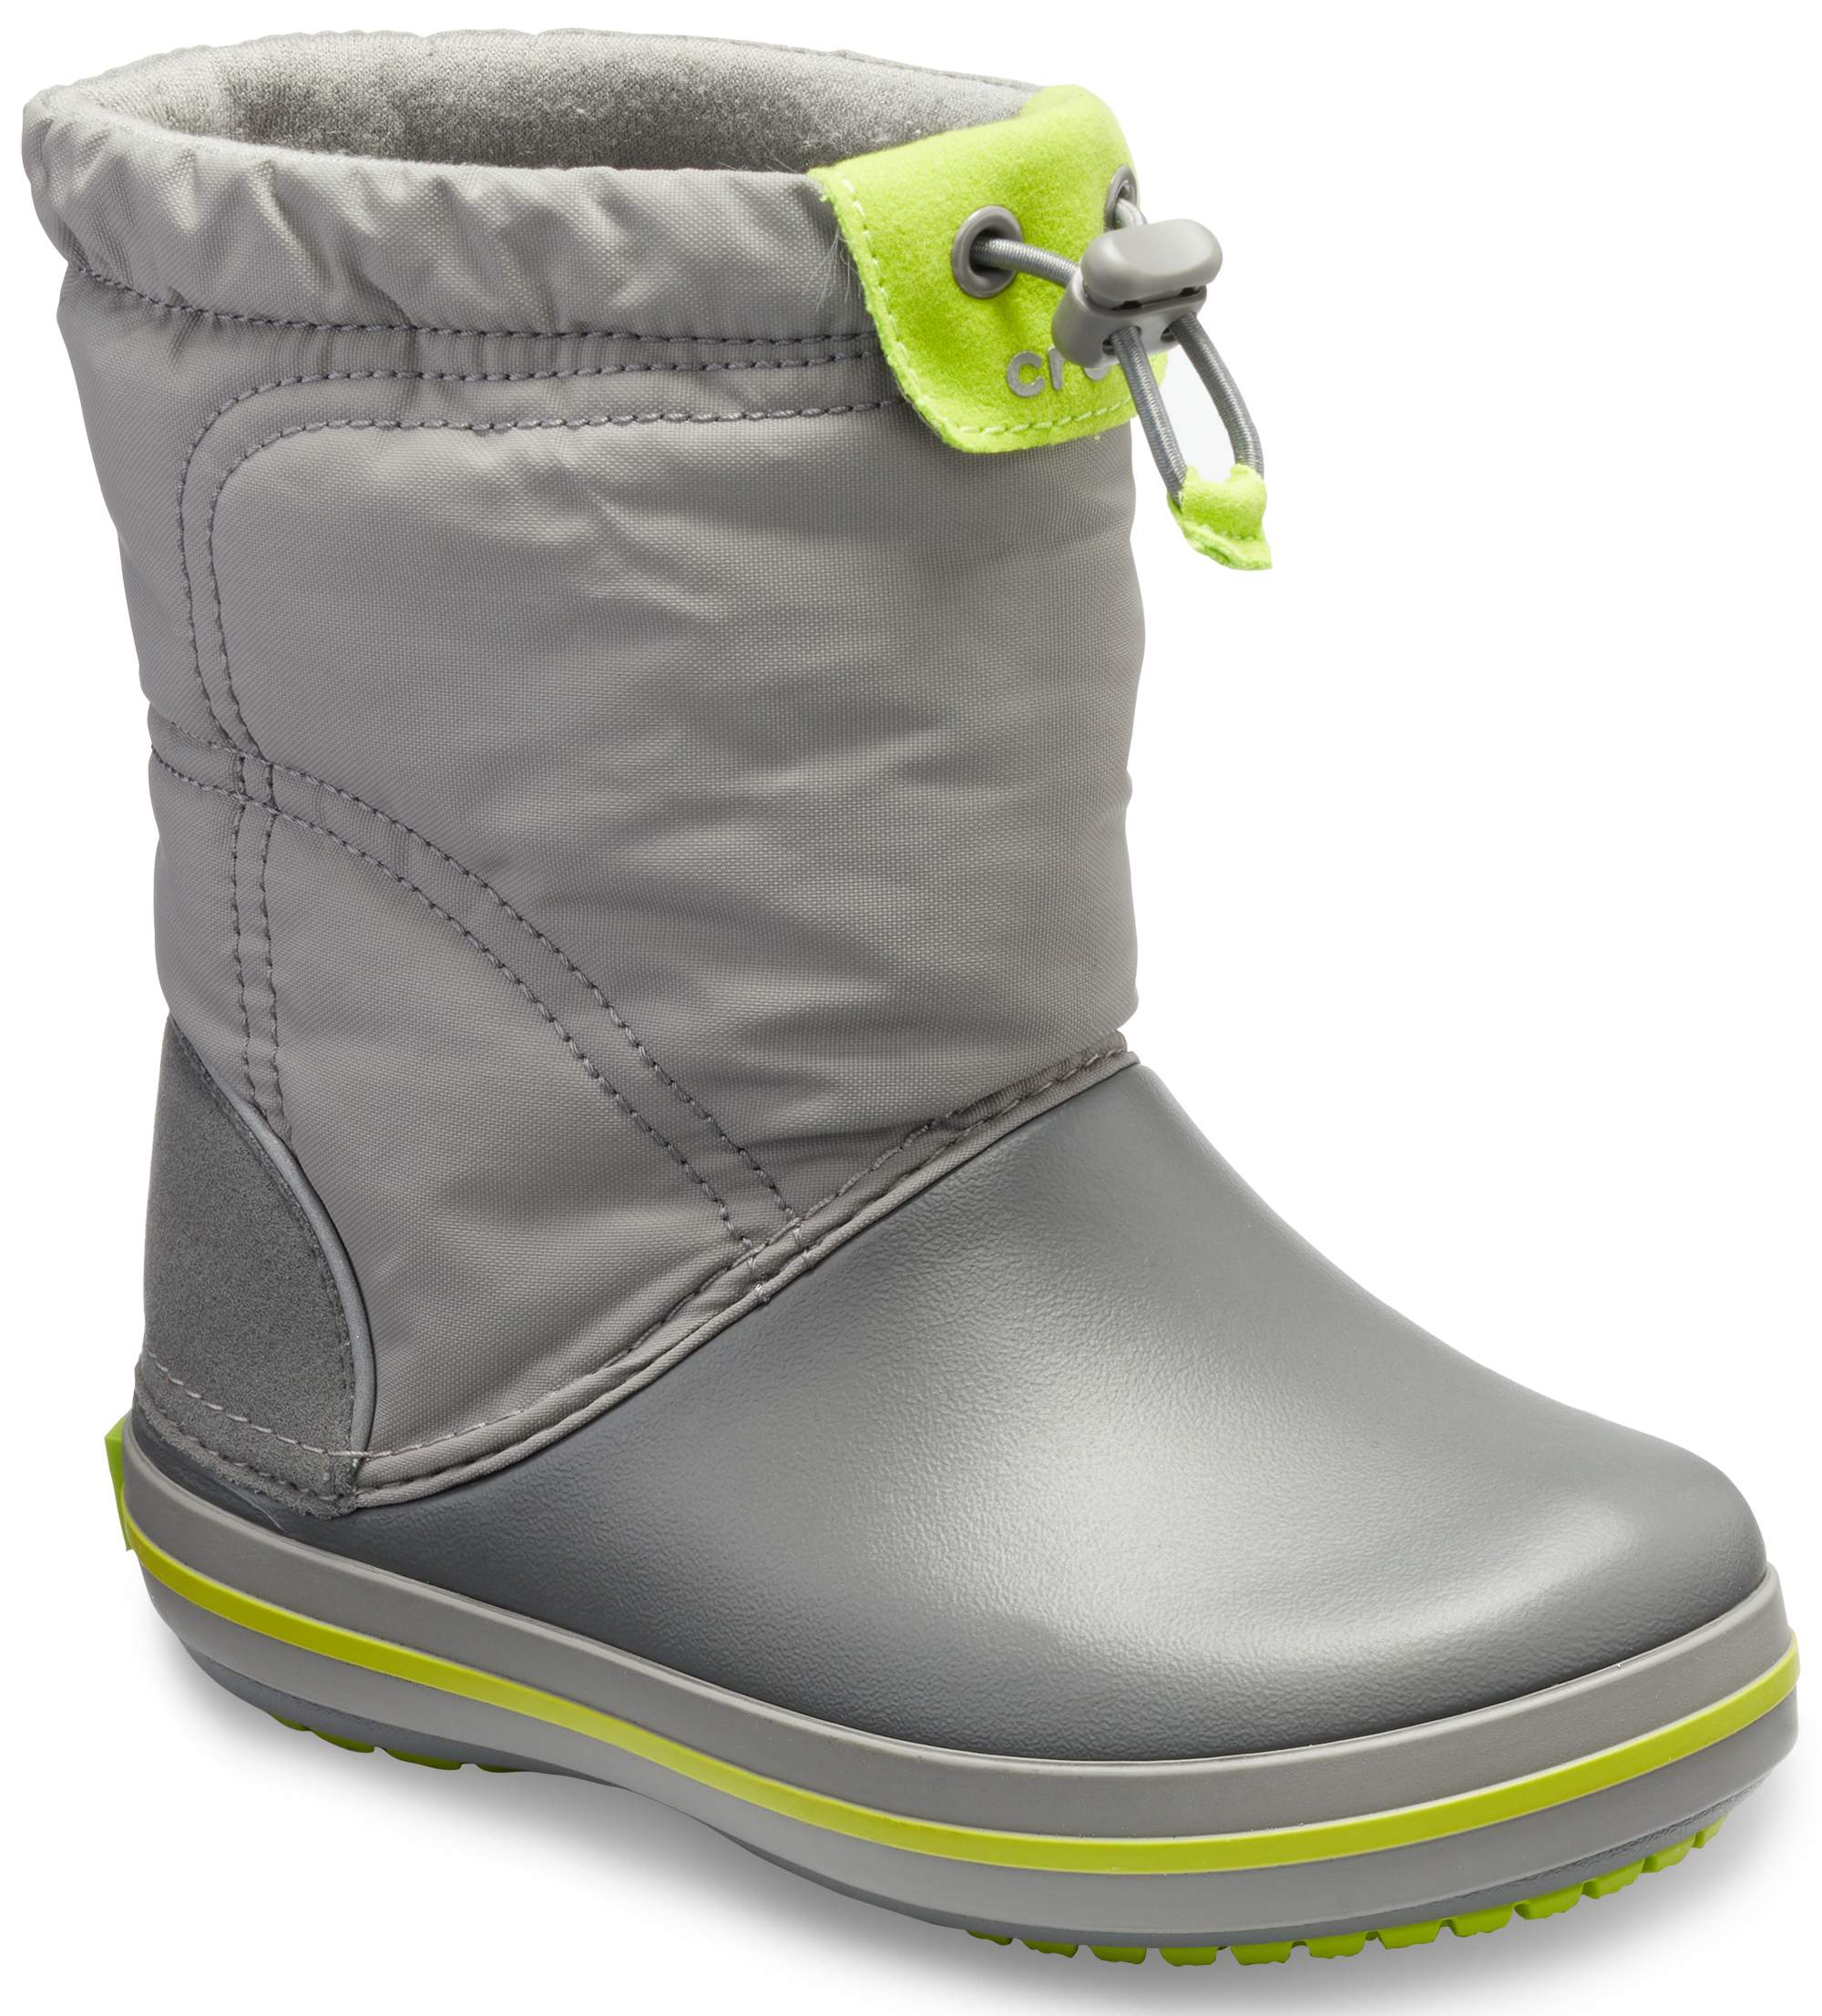 crocs lodgepoint boot